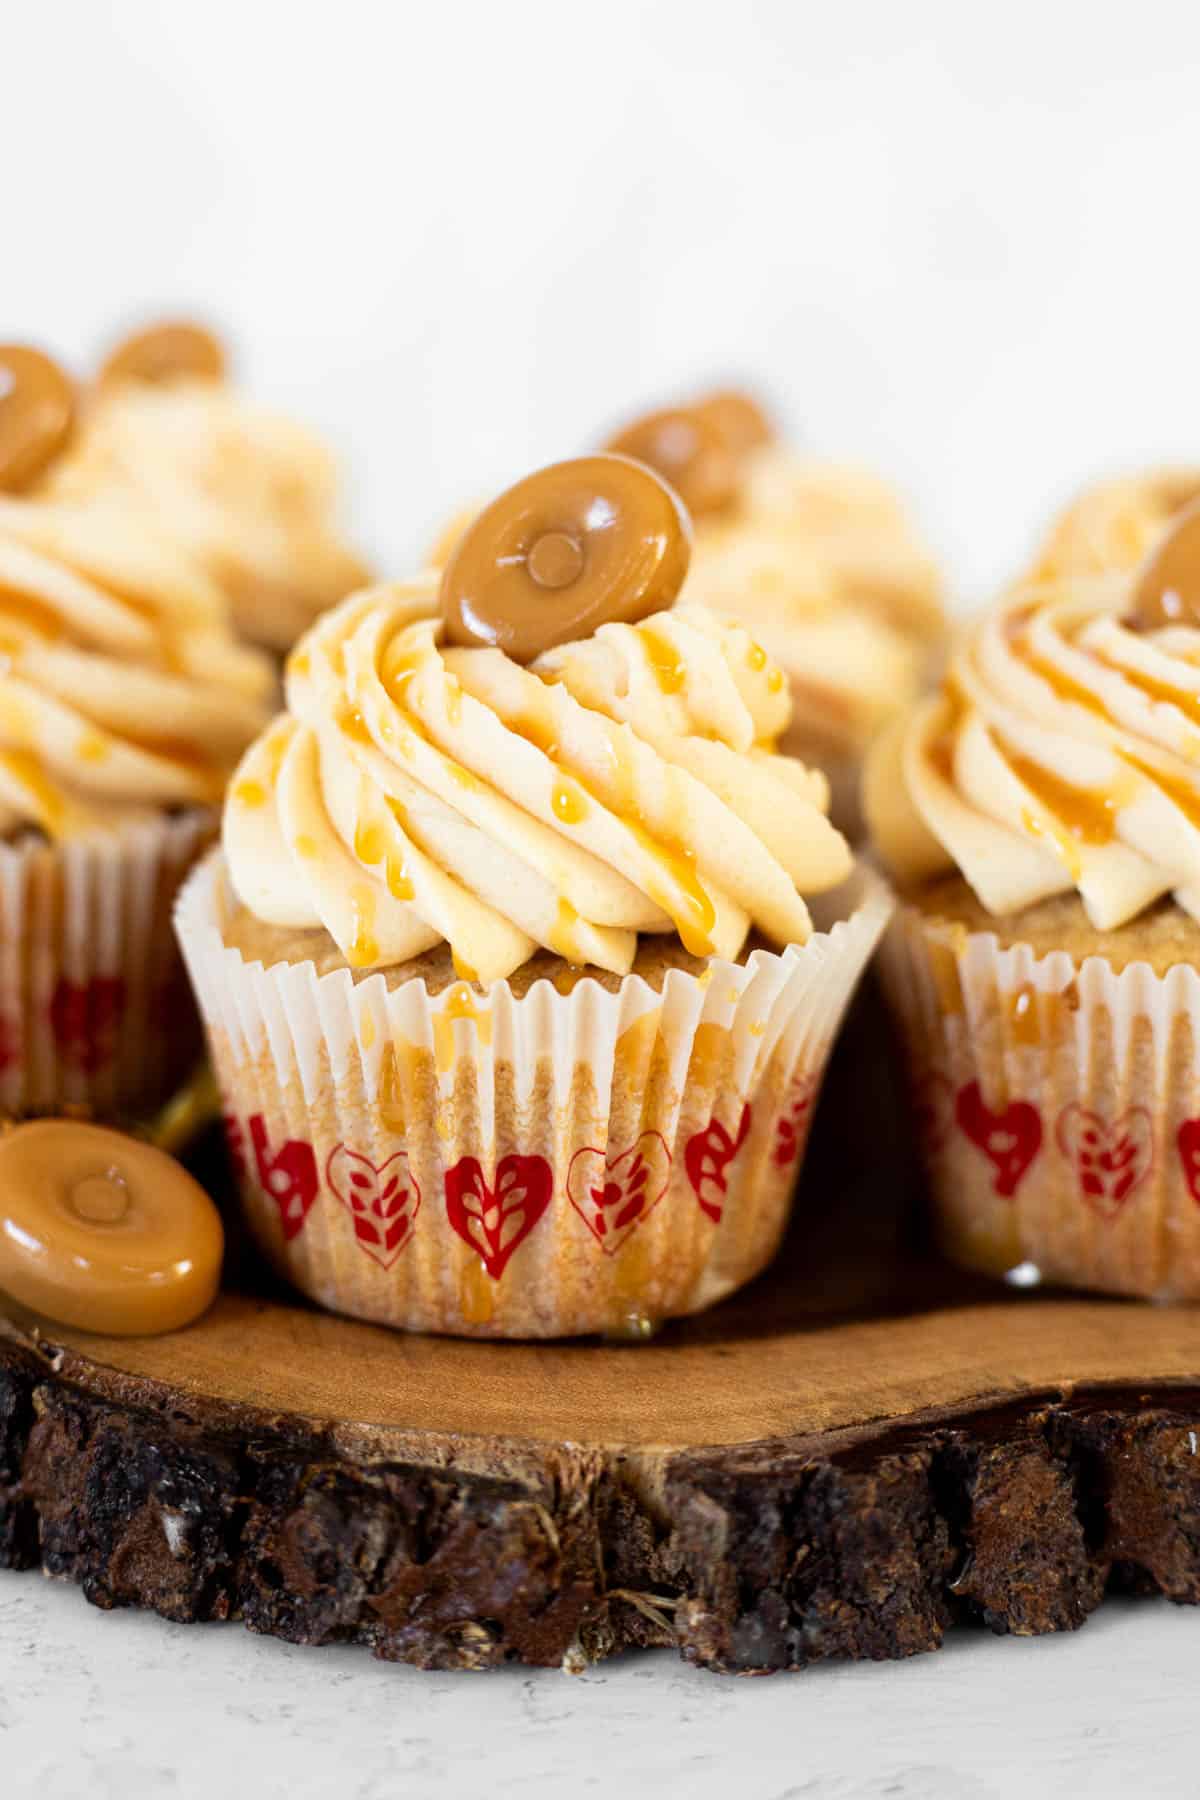 caramel filled cupcakes with drizzle and caramel candy on wooden board.